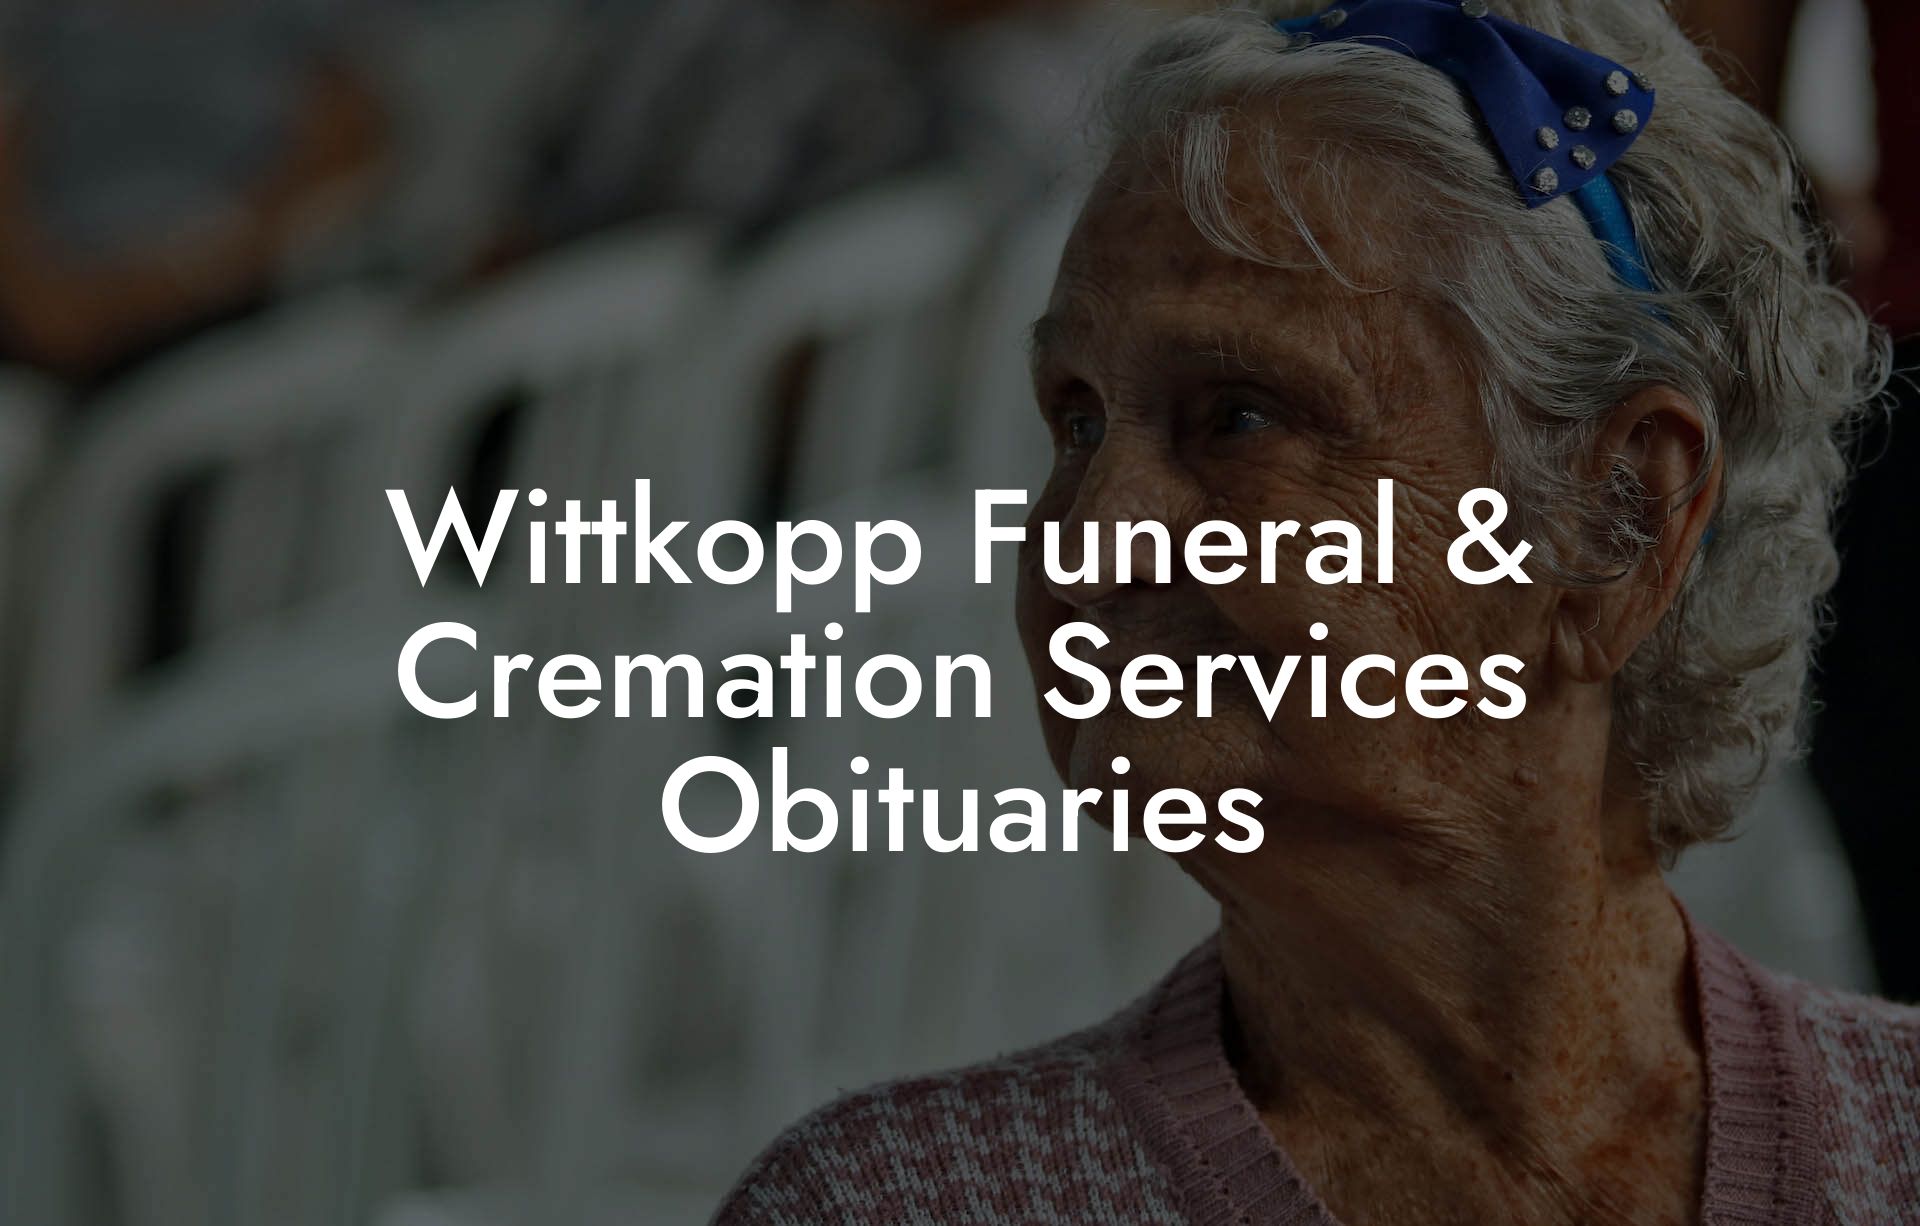 Wittkopp Funeral & Cremation Services Obituaries